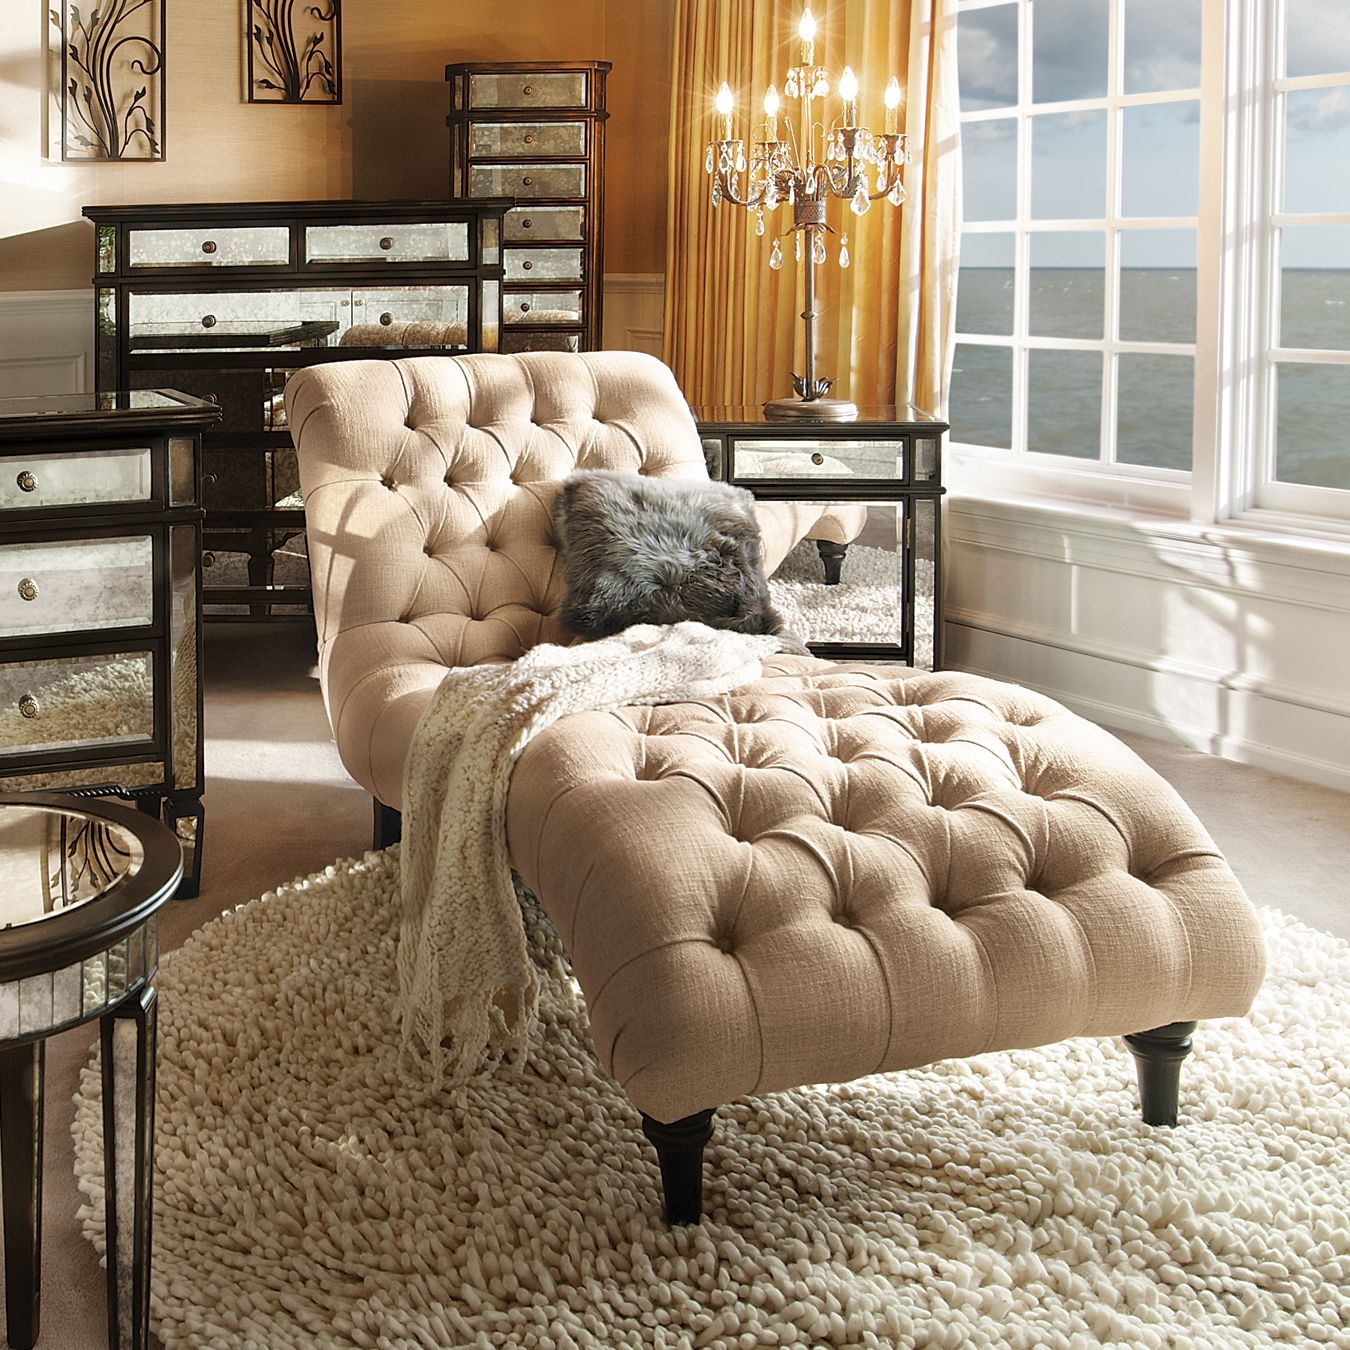 Tufted chaise lounge